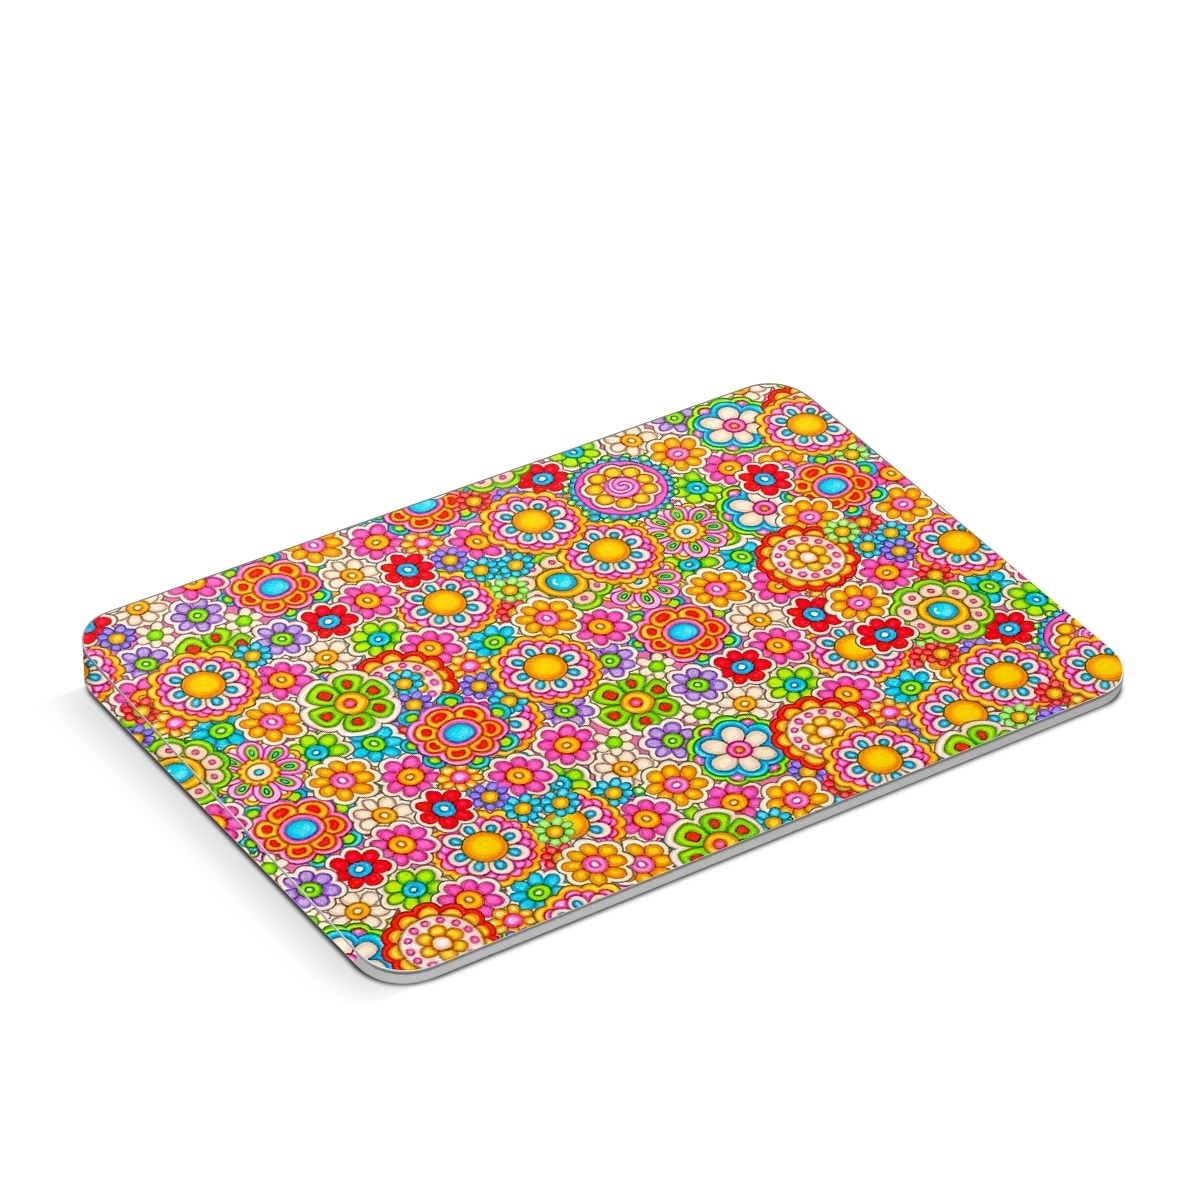 Apple Magic Trackpad Skin design of Pattern, Design, Textile, Visual arts, with pink, red, orange, yellow, green, blue, purple colors